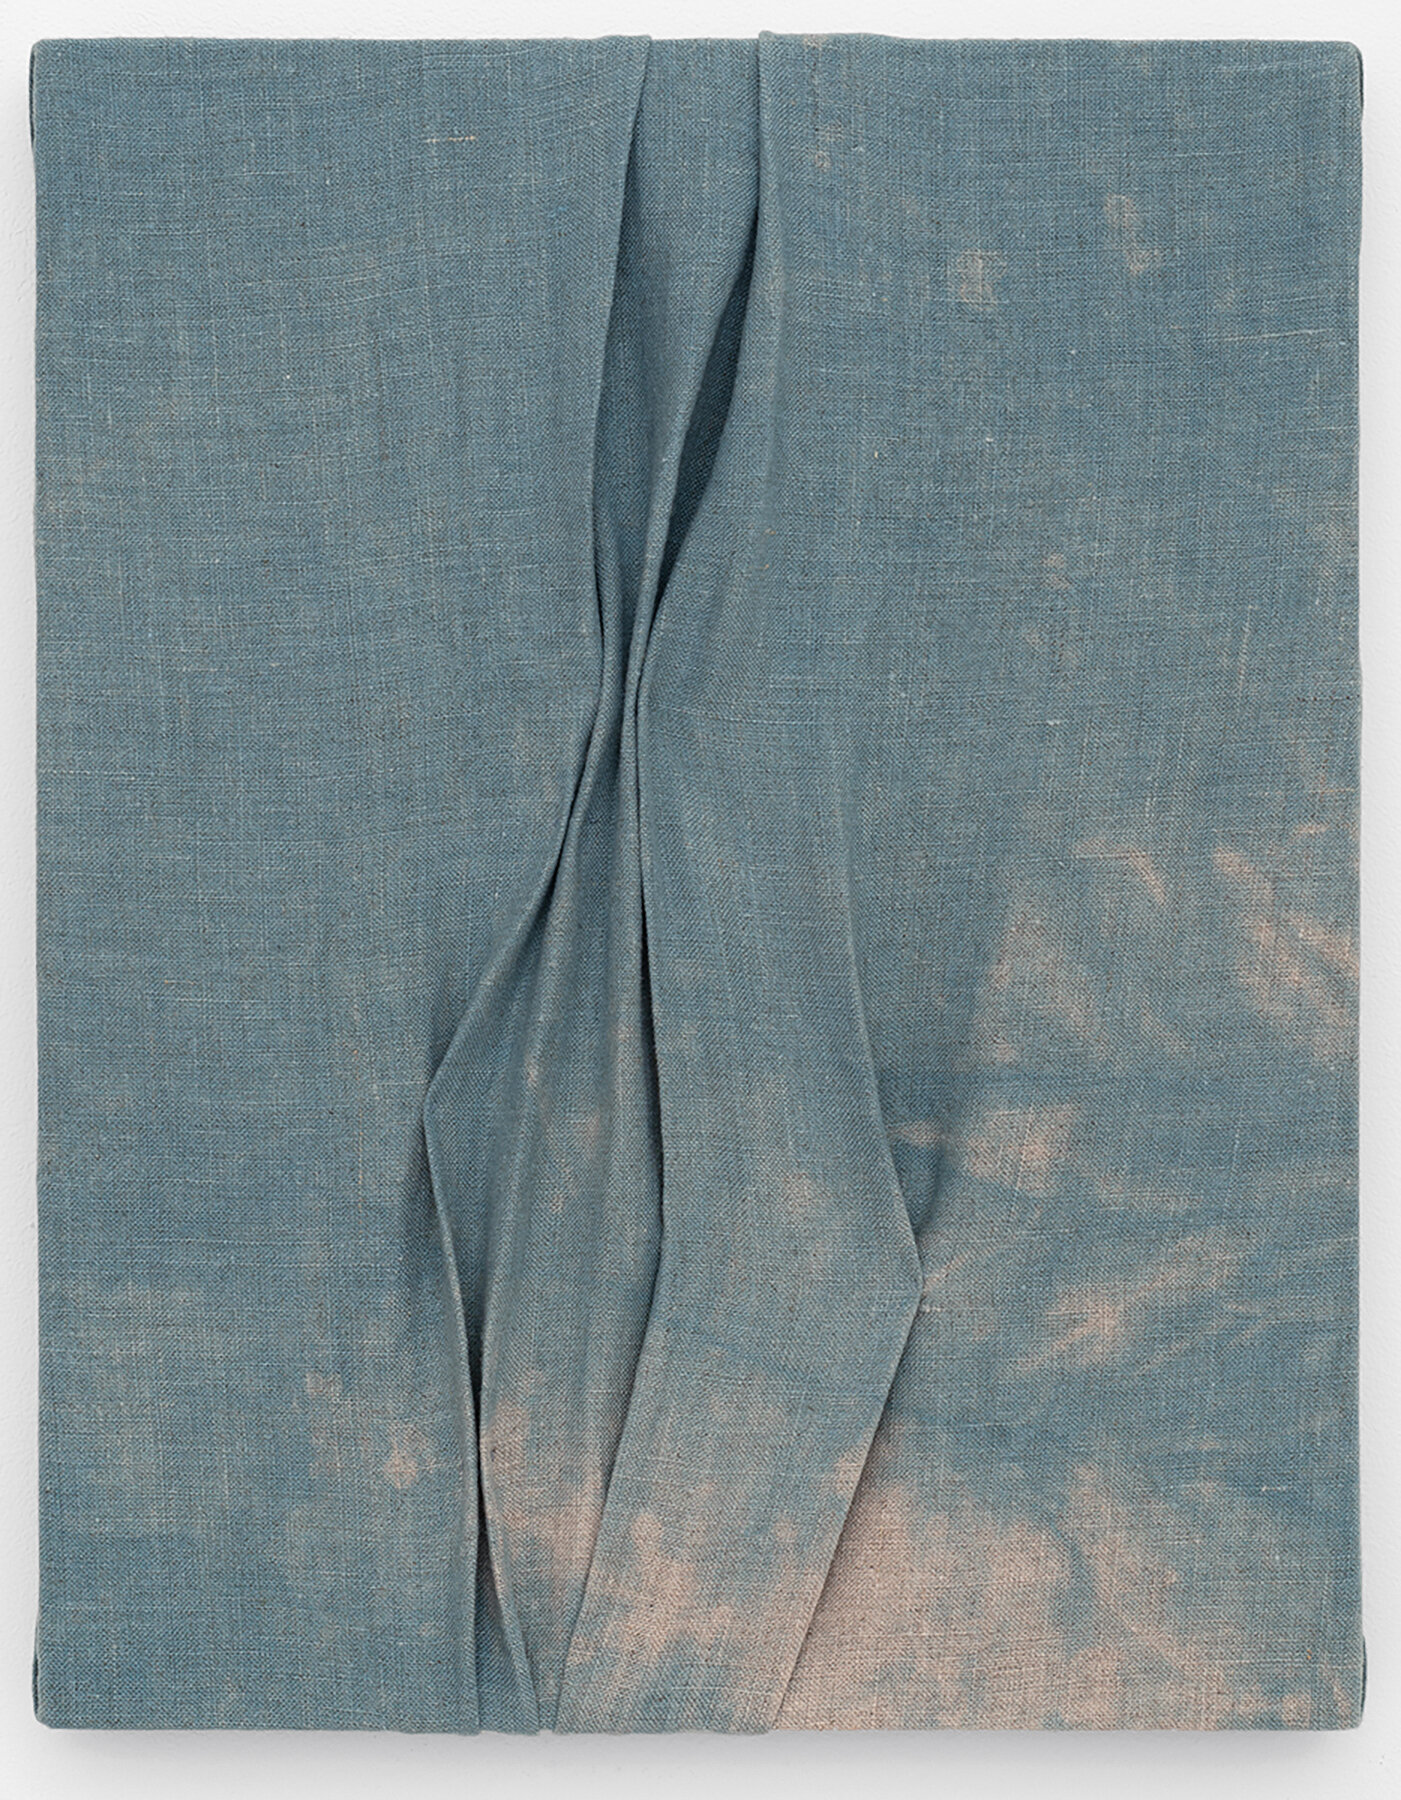   Head in the Clouds , 2021                                                                                               Indigo dyed linen, stitched                                                                                                 14 x